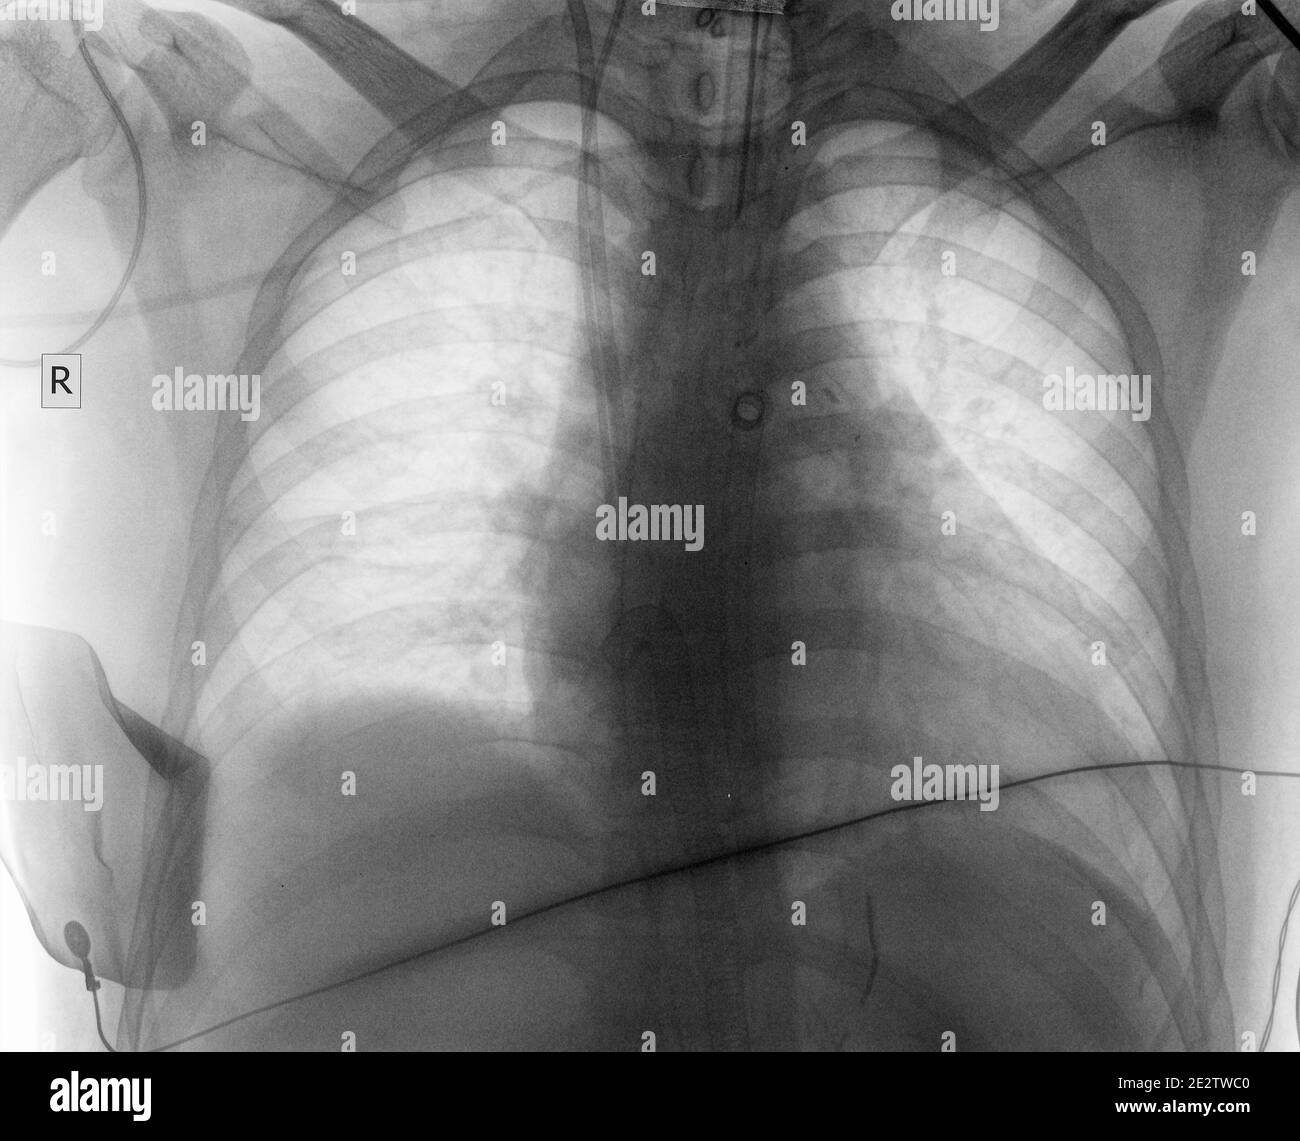 Medical x-ray image of patient for your science background. Stock Photo